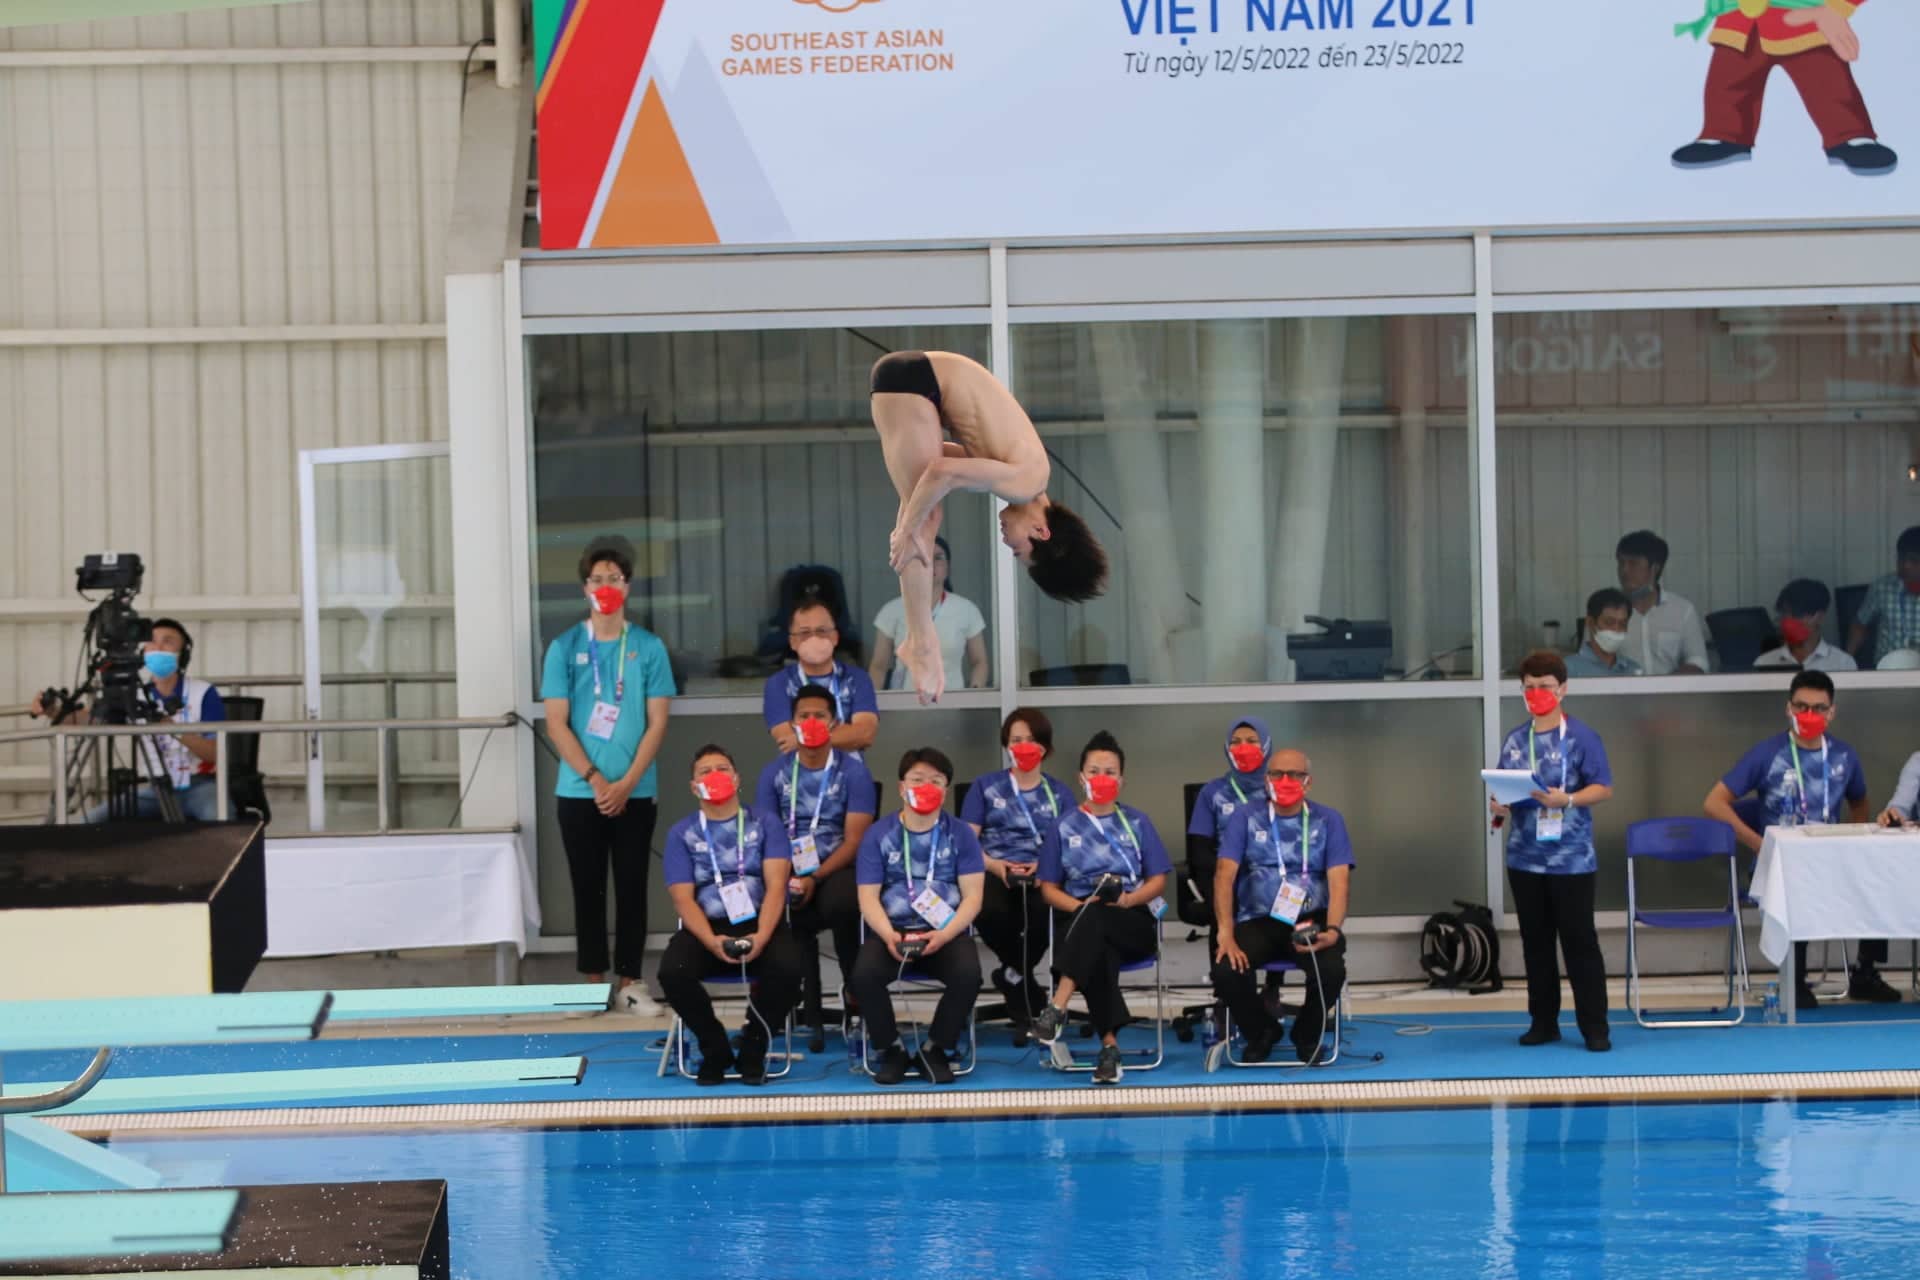 Nguyen Tung Duong competes in the men’s singles one-meter springboard final at the 31st Southeast Asian (SEA) Games at My Dinh Water Sports Center in Hanoi, Vietnam, May 9, 2022. Photo: Tan Phuc / Tuoi Tre